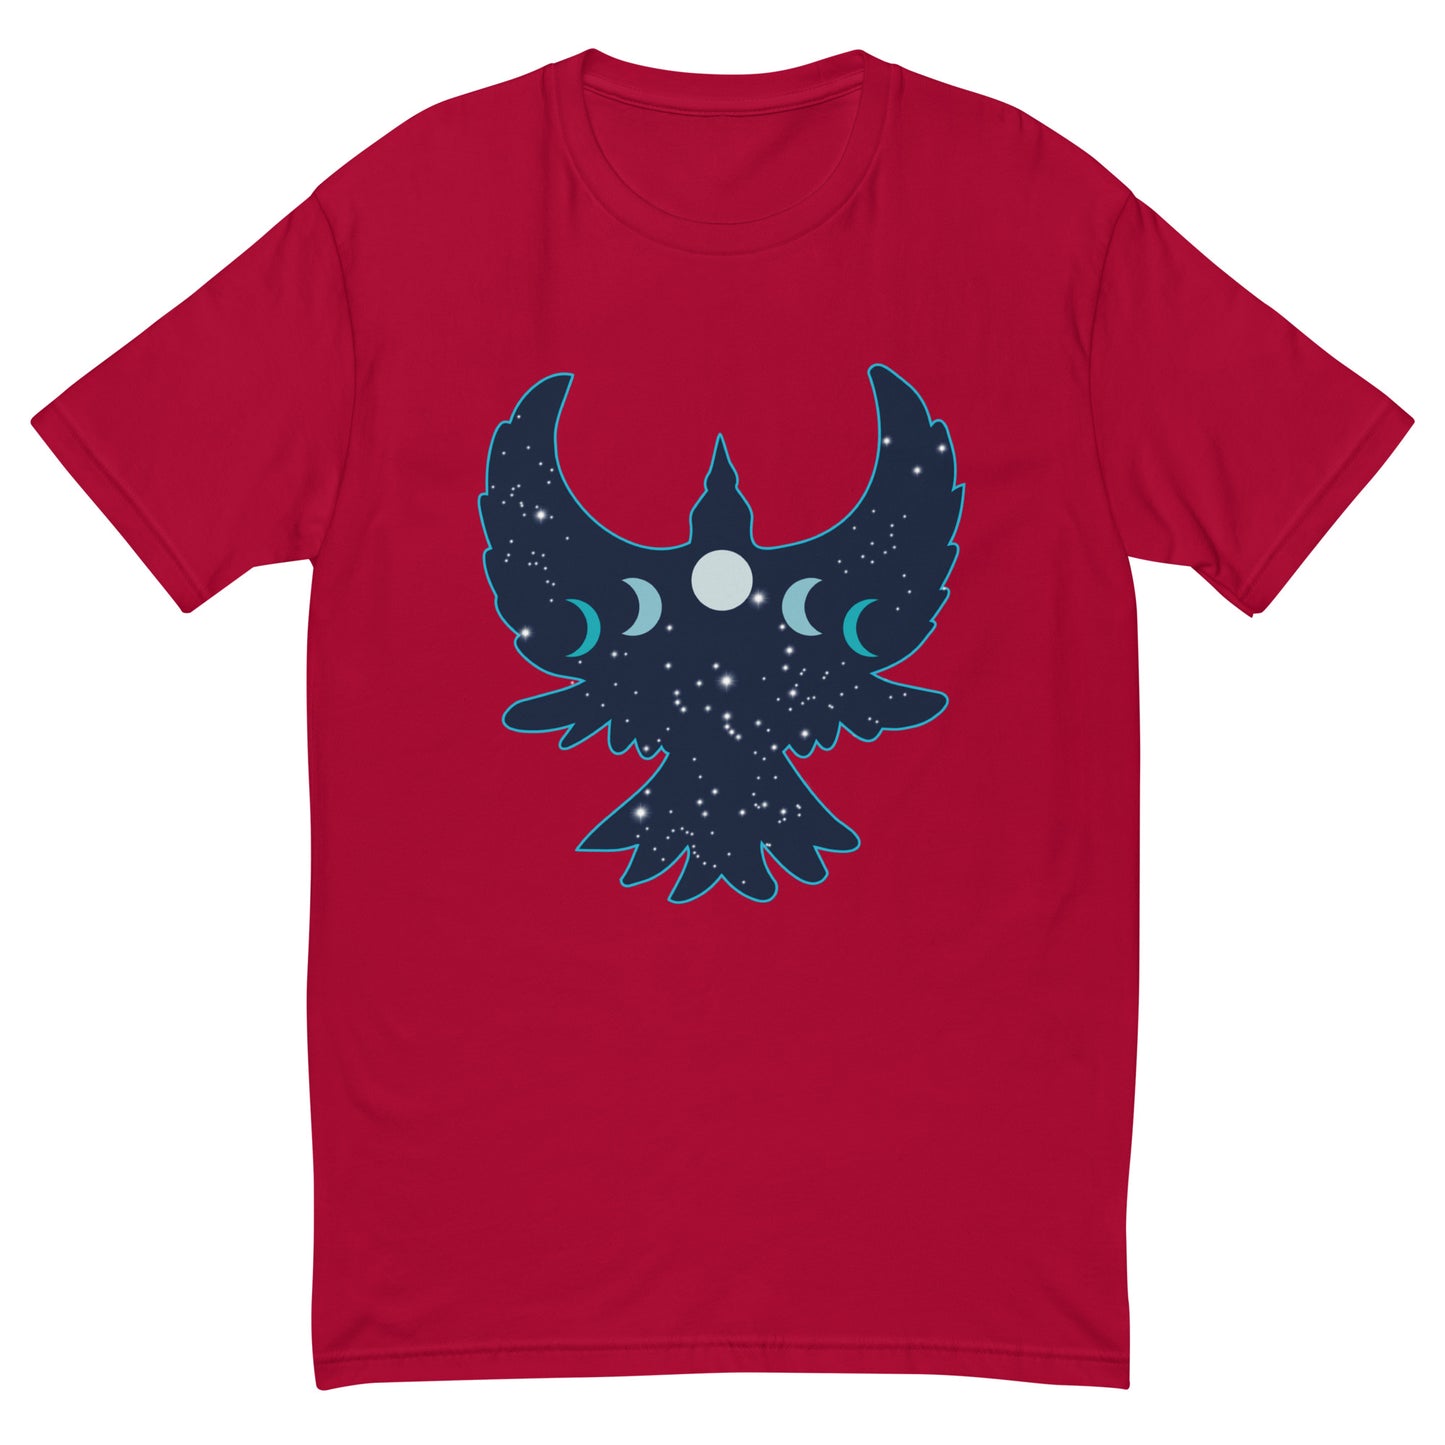 Raven - Men's Fitted Tee